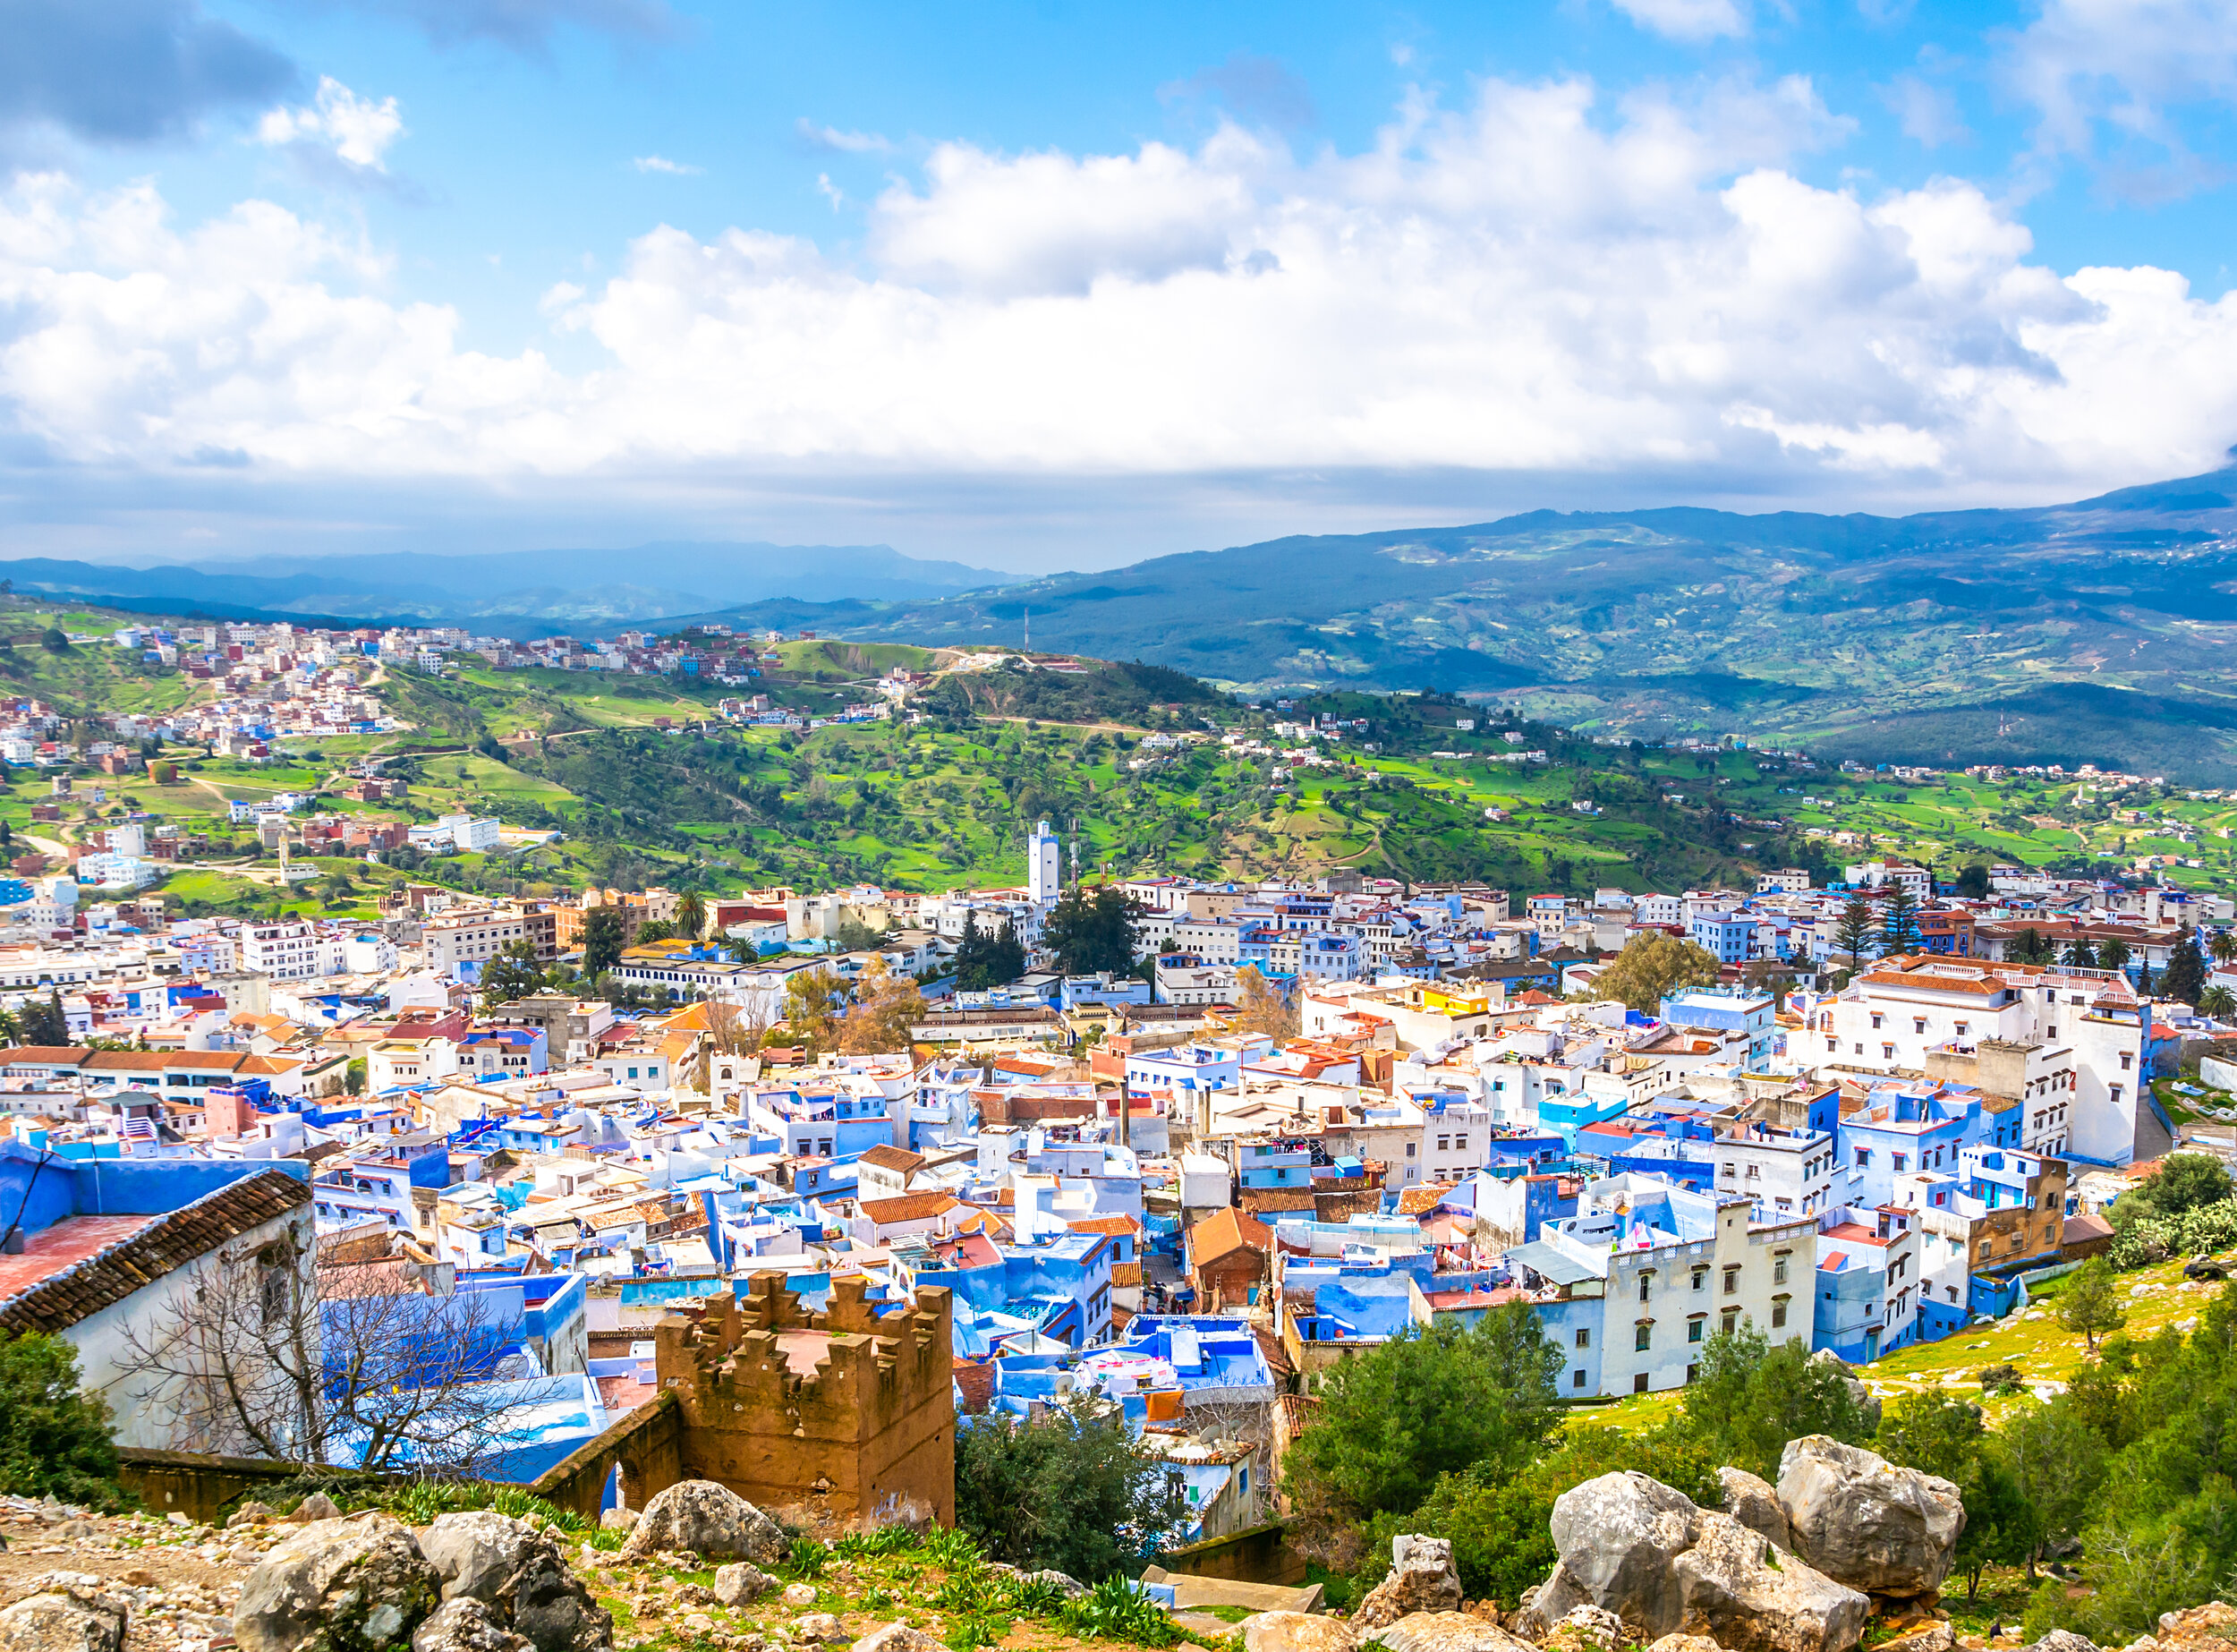  View of the blue city - Chefchaouen, Morocco 